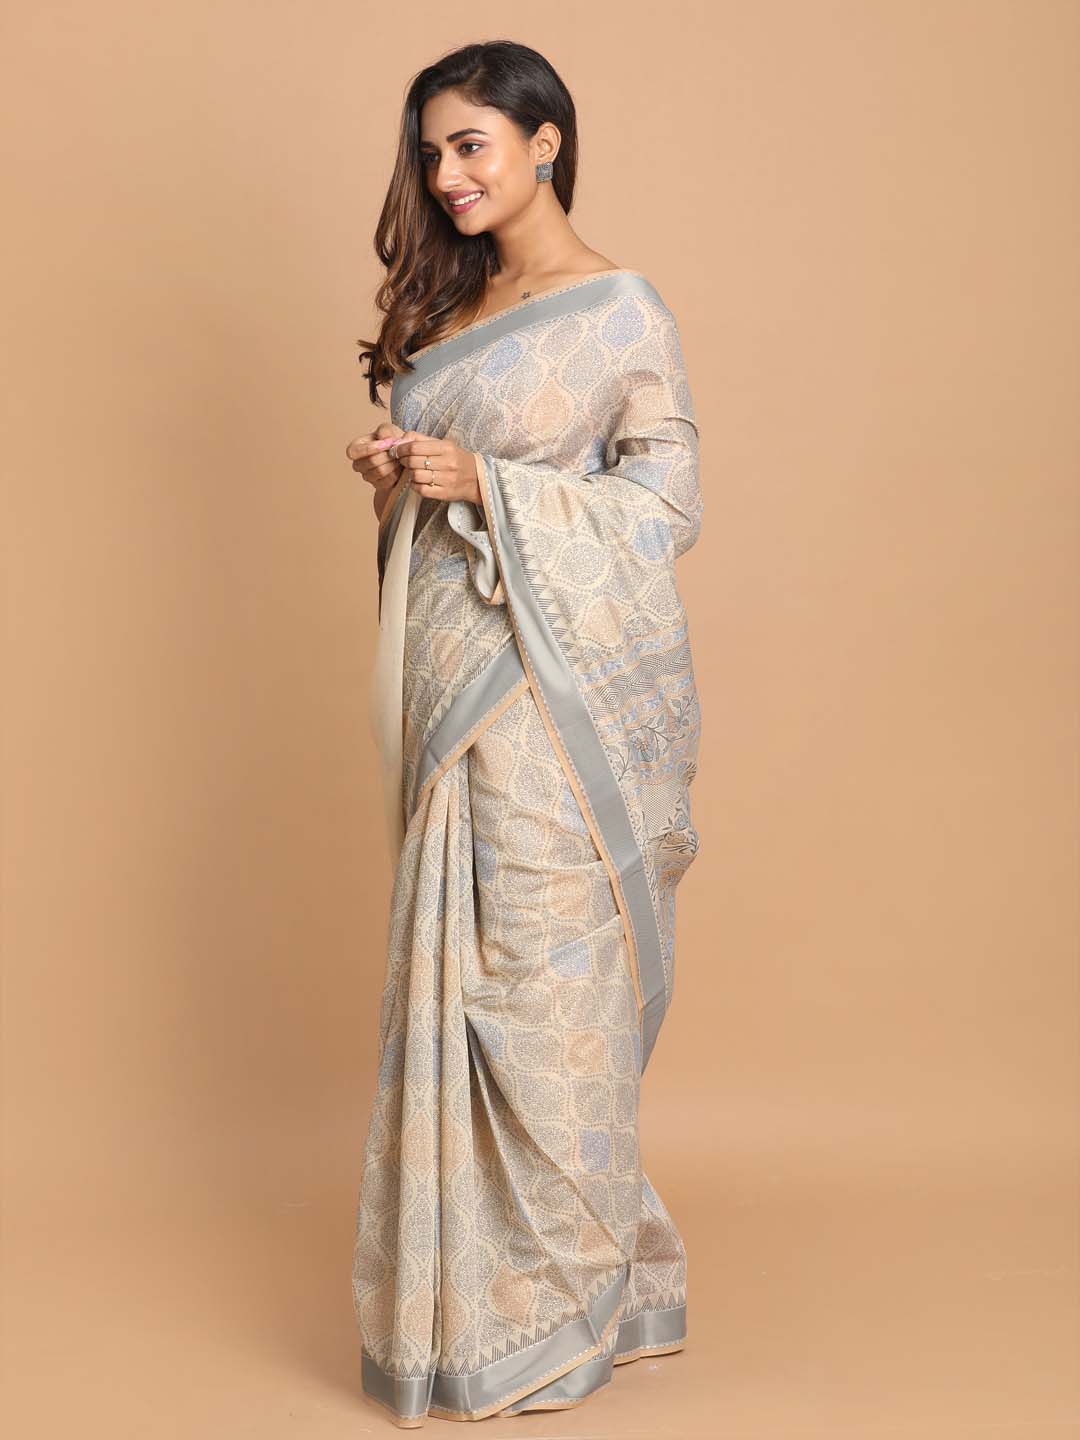 Indethnic Printed Cotton Blend Saree in Grey - View 1